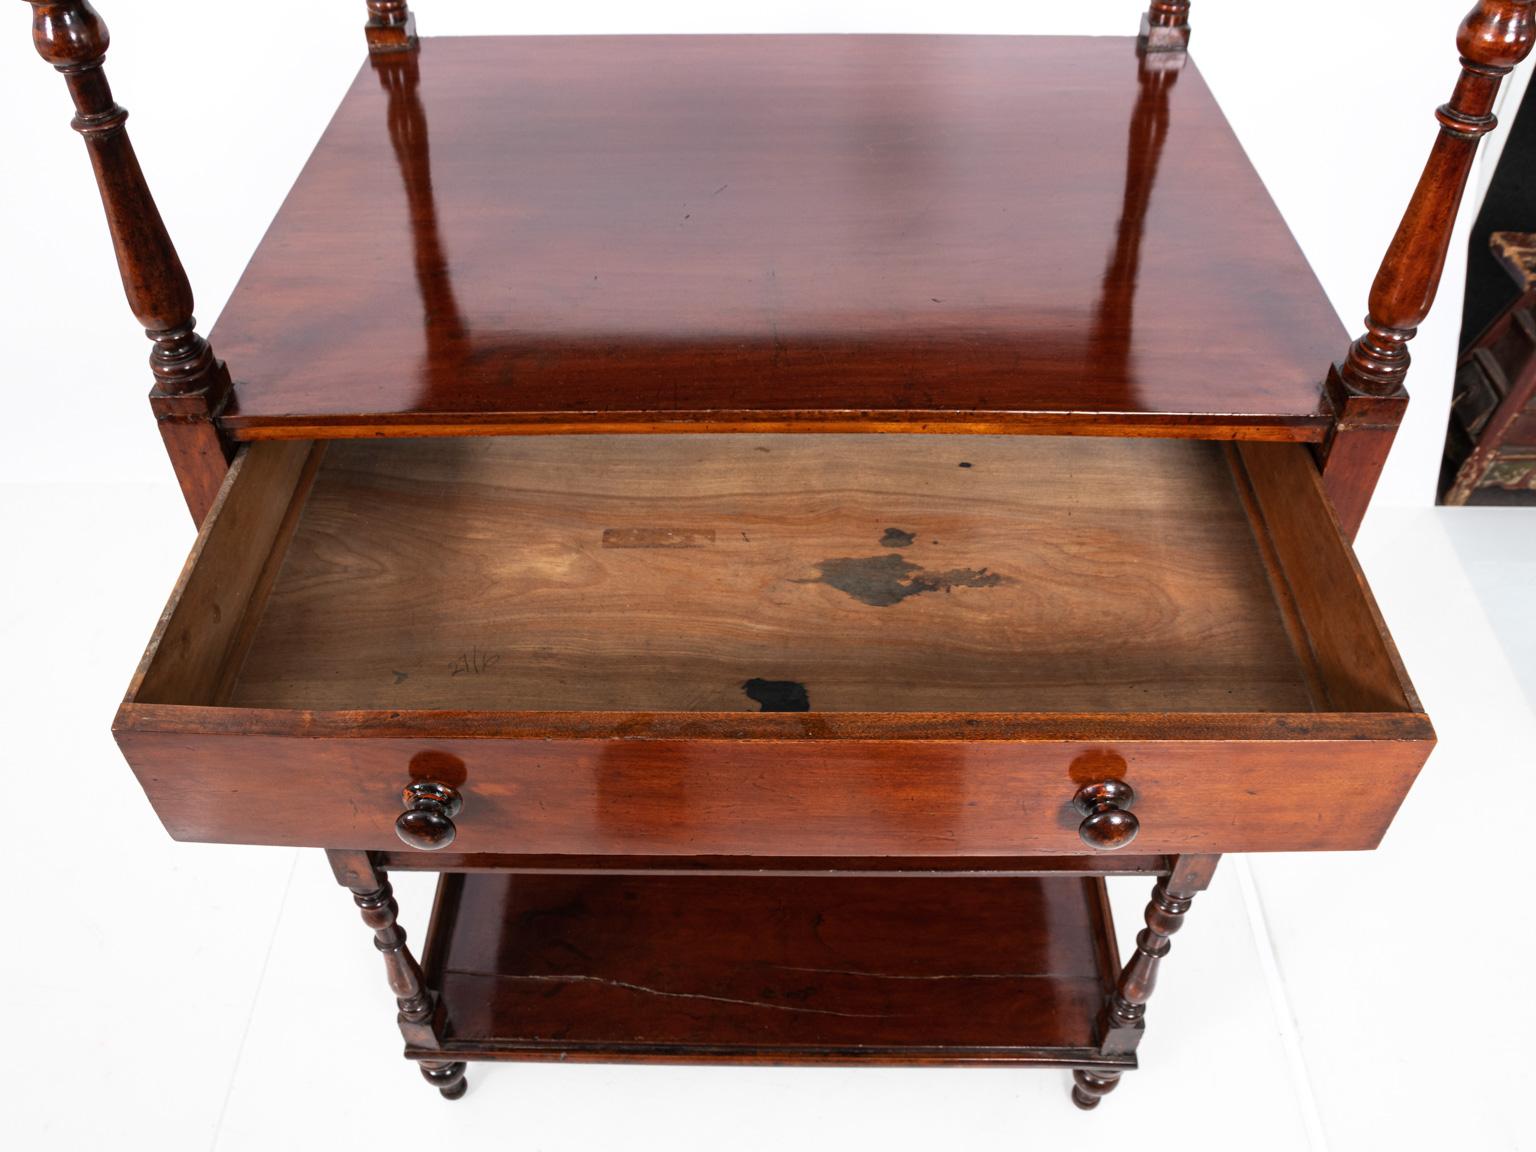 Five shelf English étagère with turned detail and finials, circa 1840s. The piece also features one drawer. Please note of wear consistent with age.